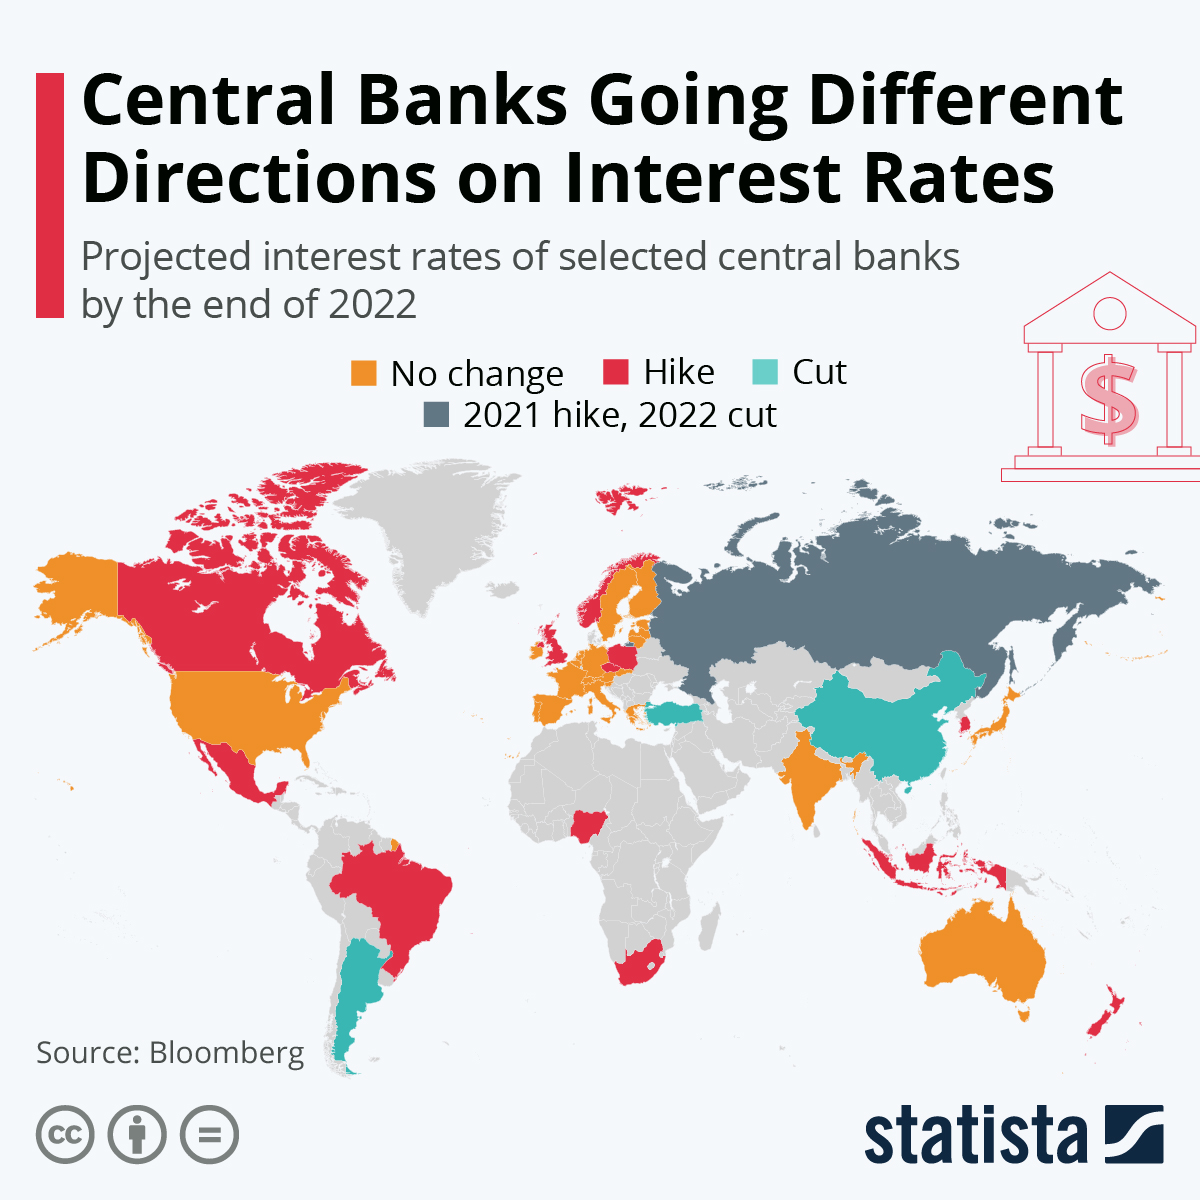 Central Banks Going Different Directions on Interest Rates